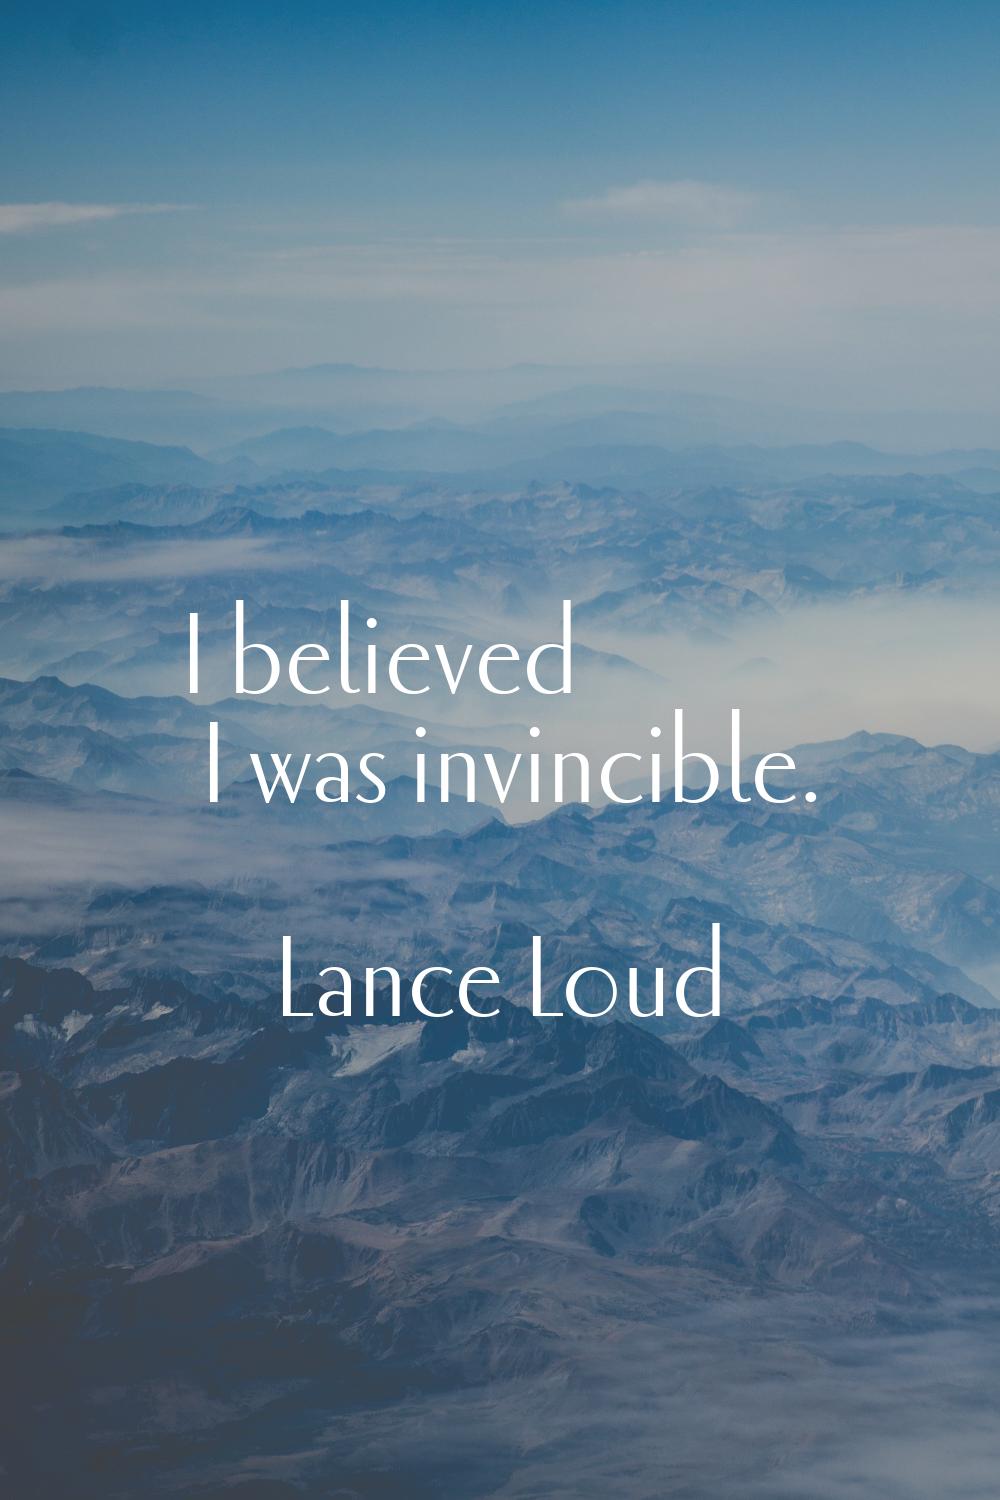 I believed I was invincible.